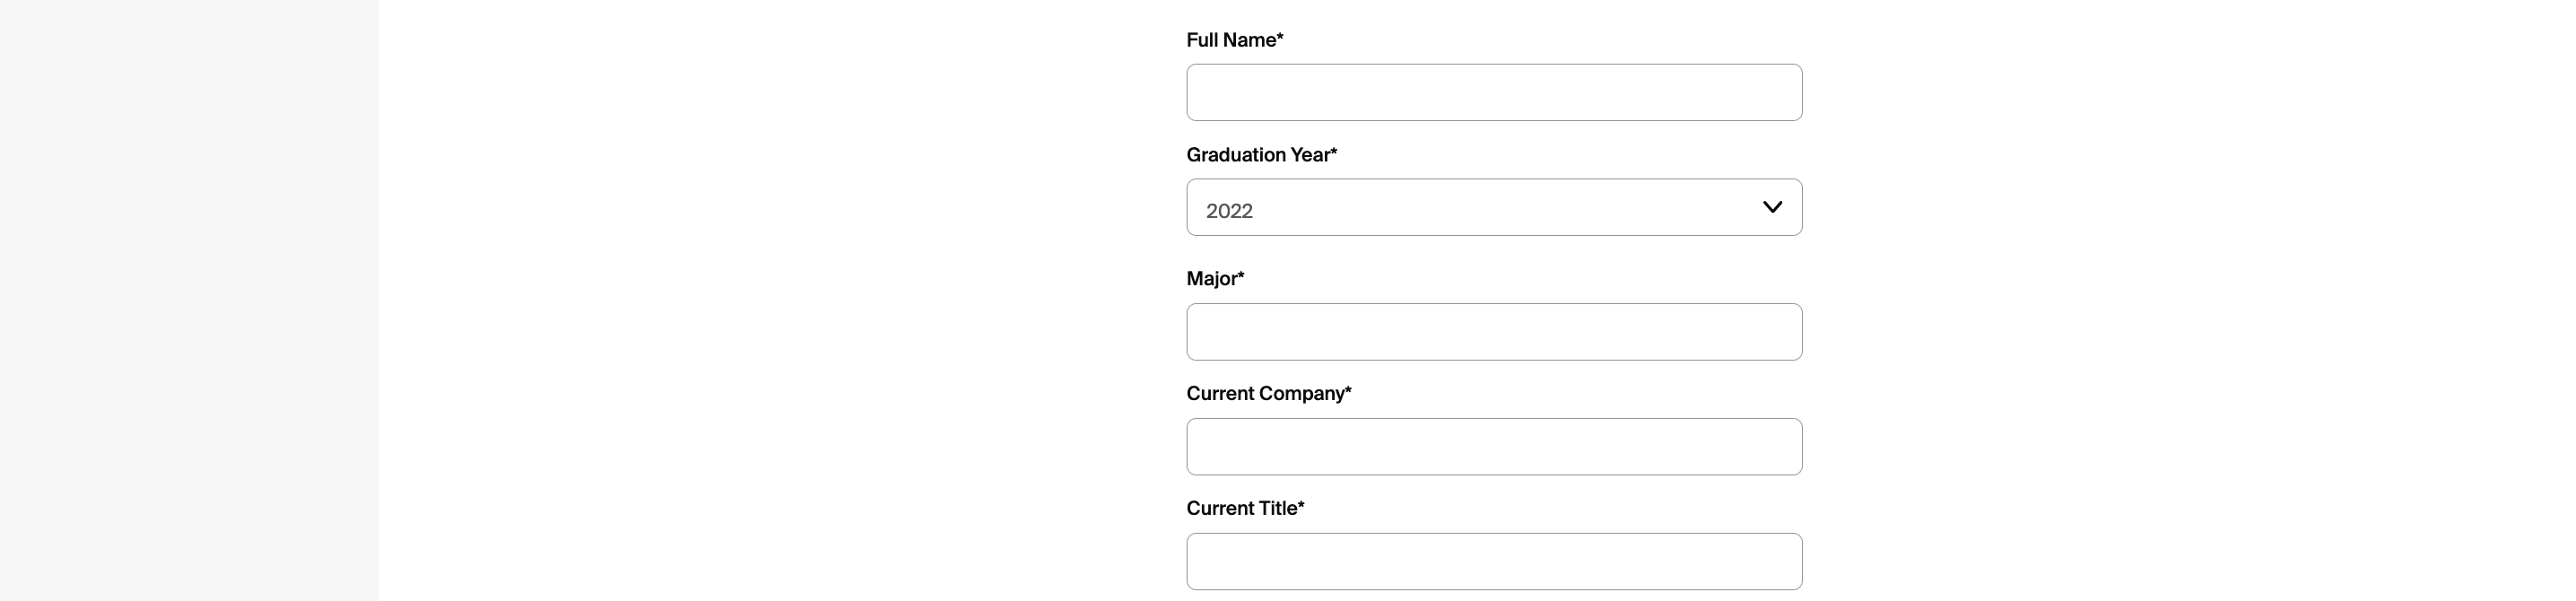 Featured_Alumni_Details_Full_Name_Graduation_Year_Major_Company_and_Title.png